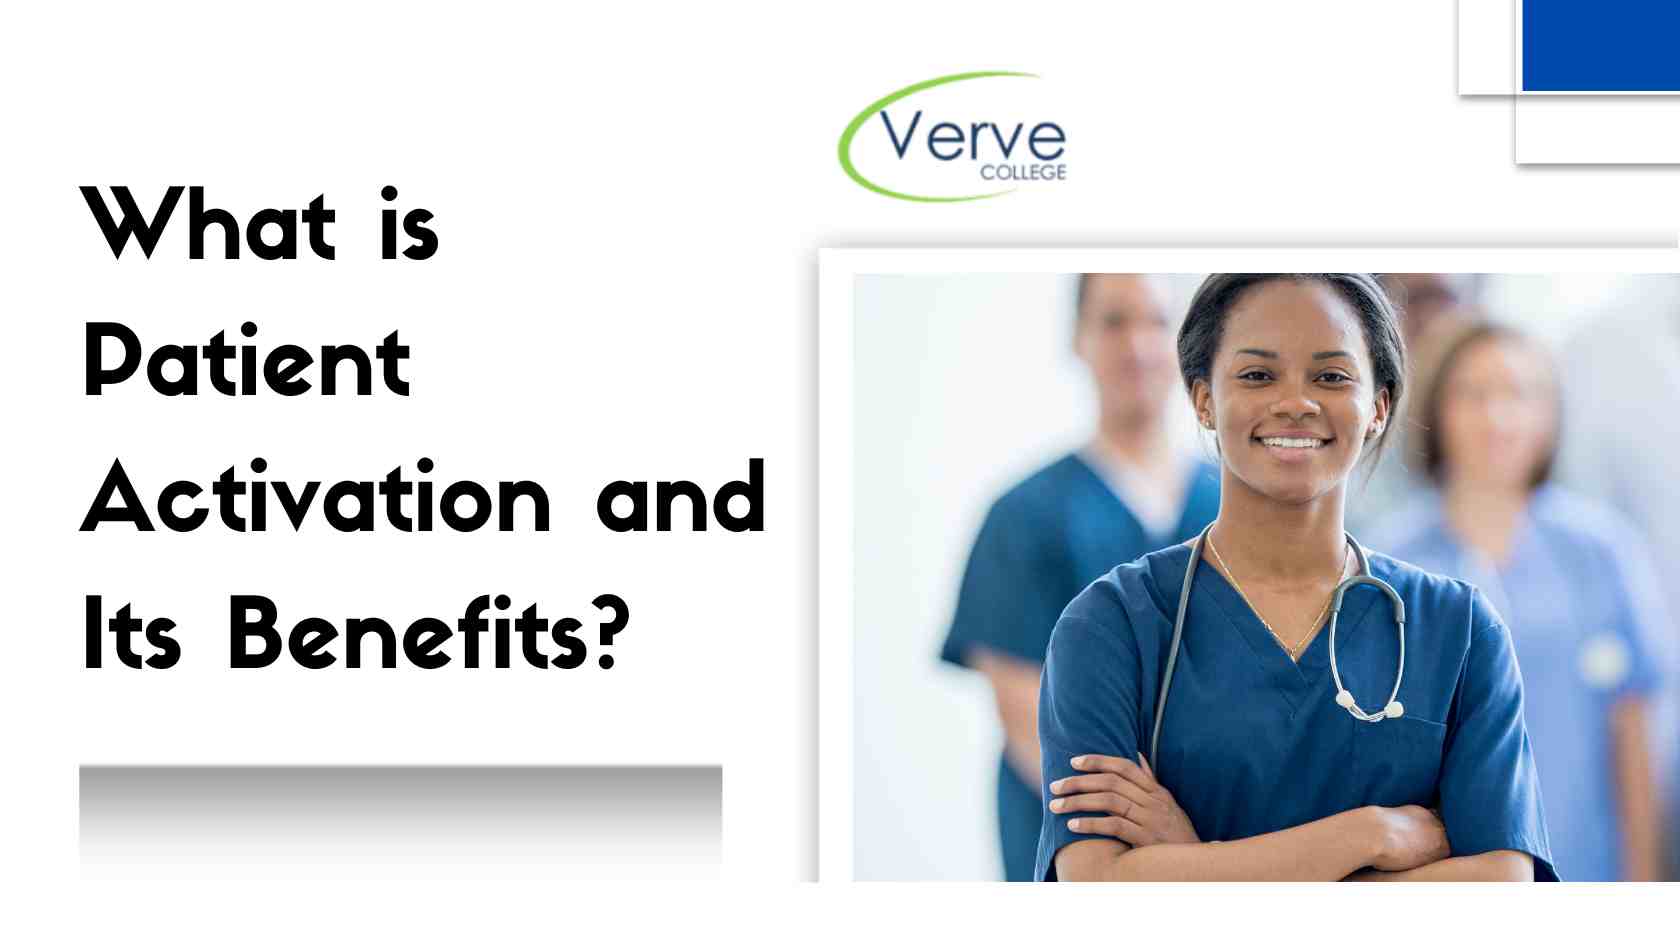 What is Patient Activation and Its Benefits?